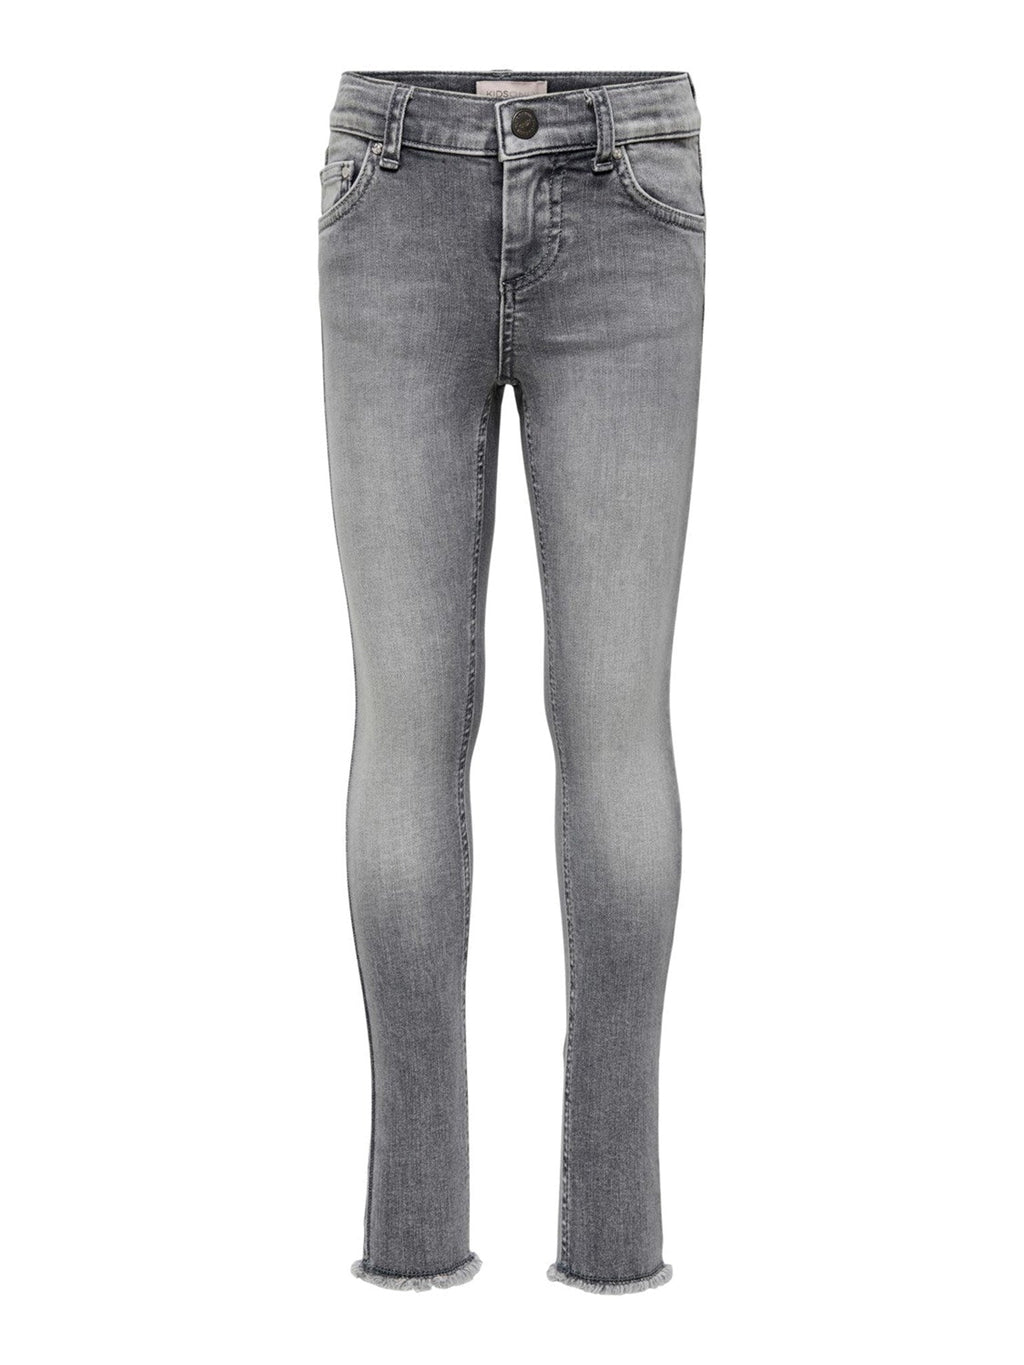 Errötung Skinny Jeans - grauer Jeans